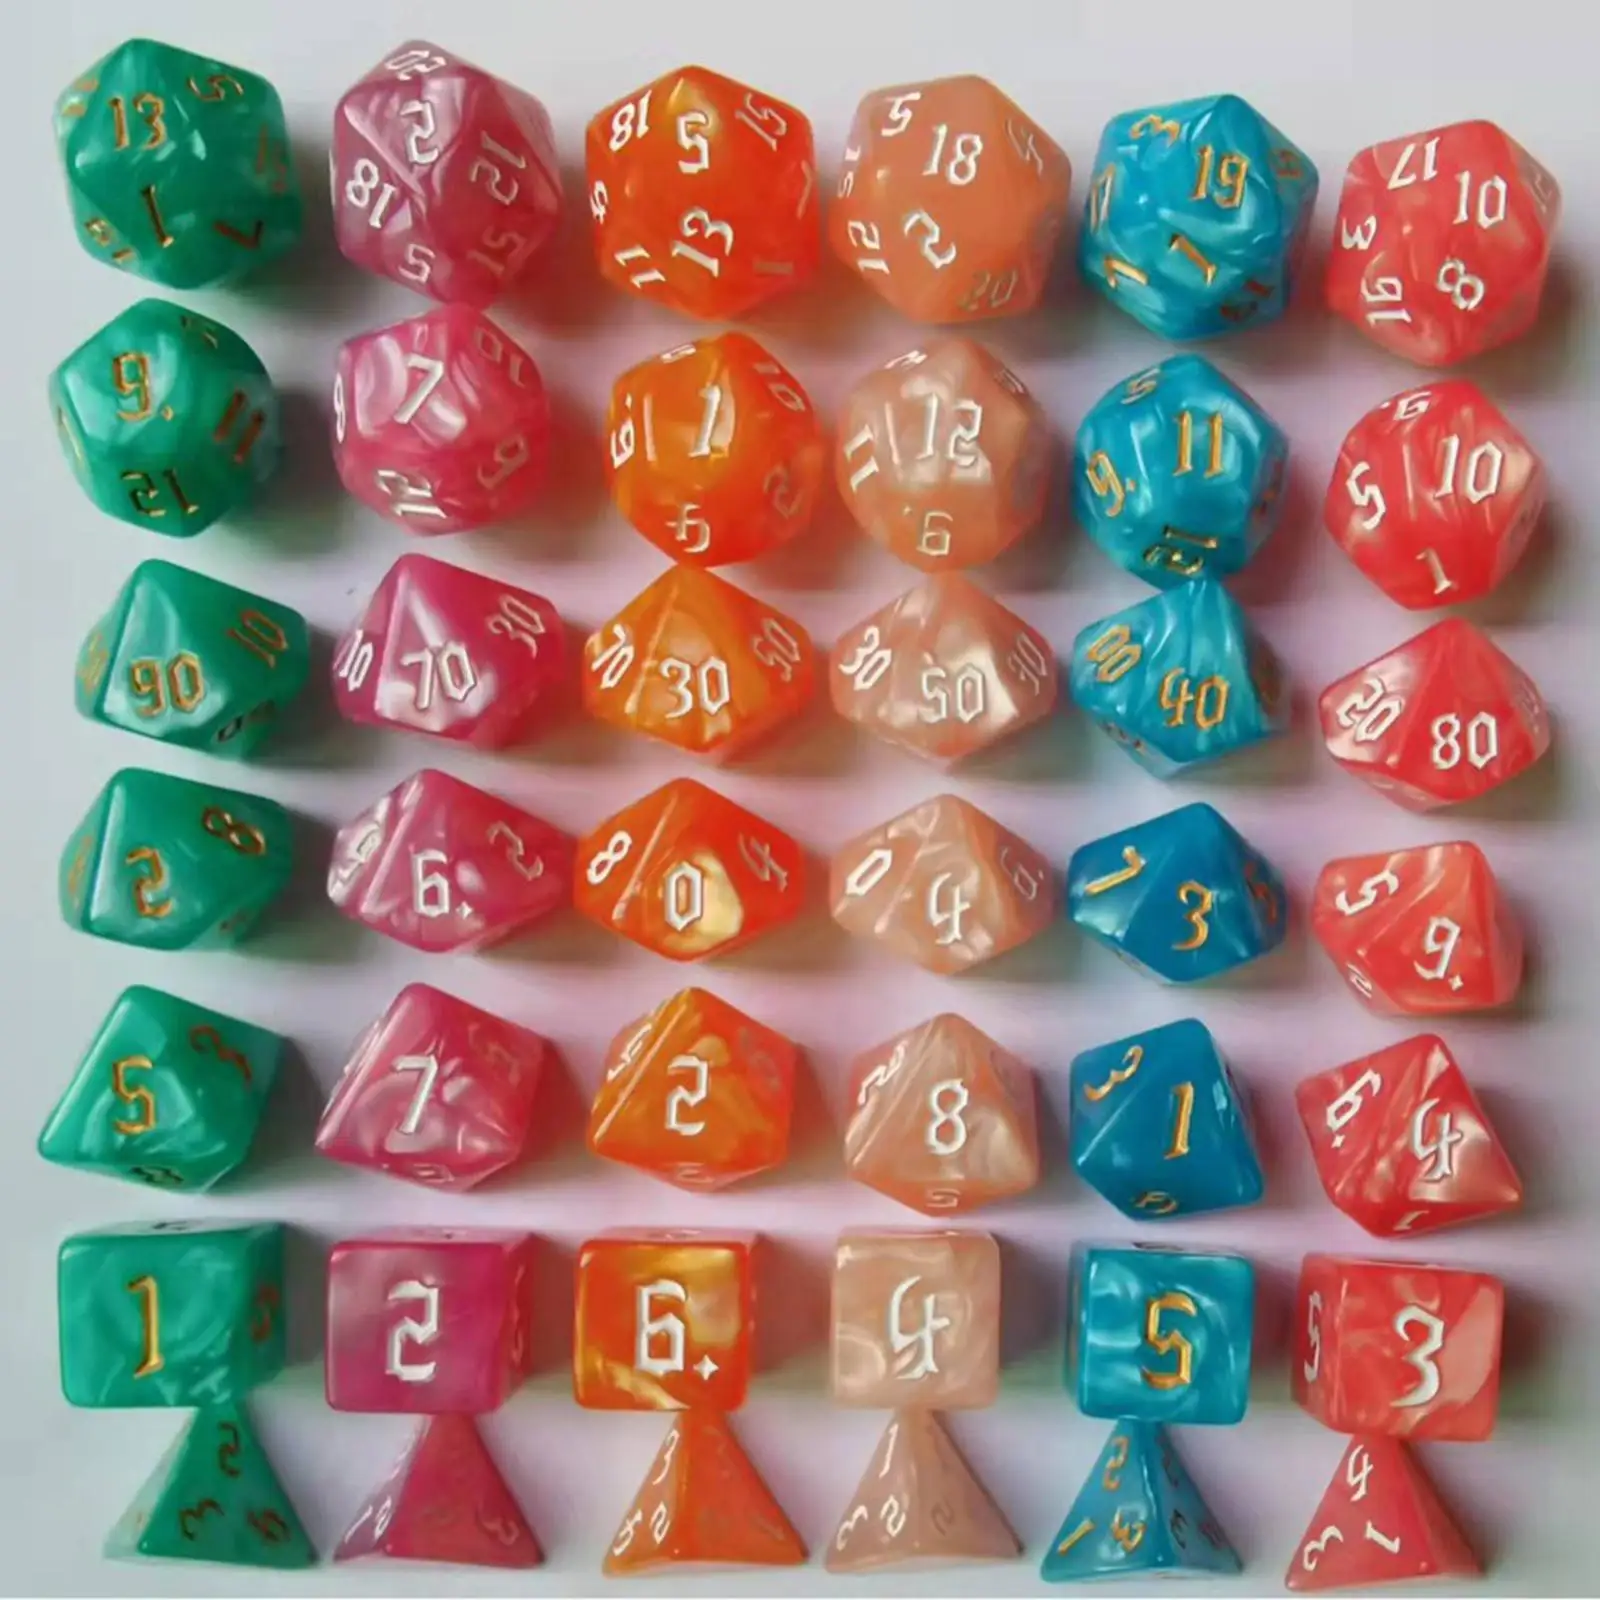 42 Pieces Polyhedral Dices Set Party Favor Toy for Beach Day Table